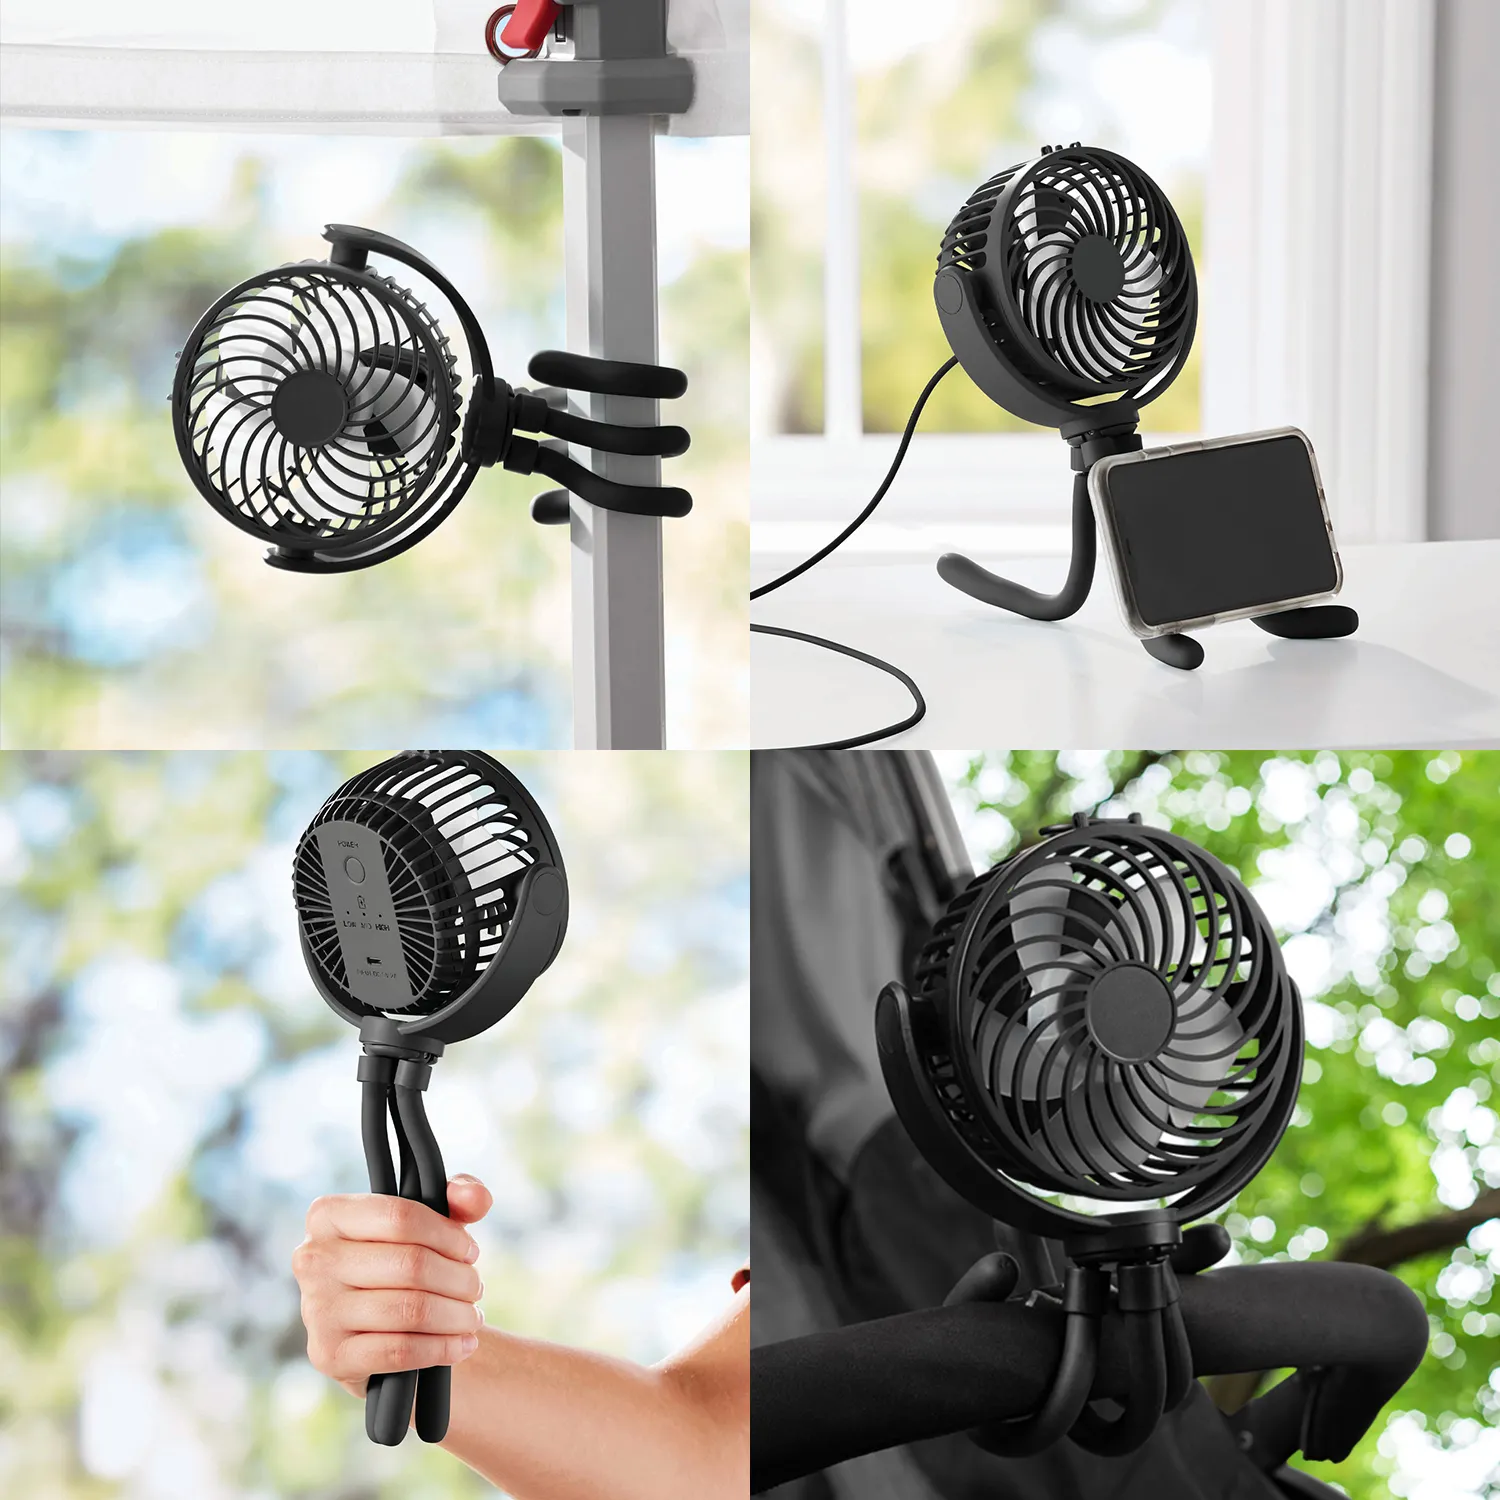 RoHS 4 In 1 Hanging Handheld Adjustable 5V USB Rechargeable Wireless Air Cooling Portable Fan Electric DC Table Flex Smart Fan